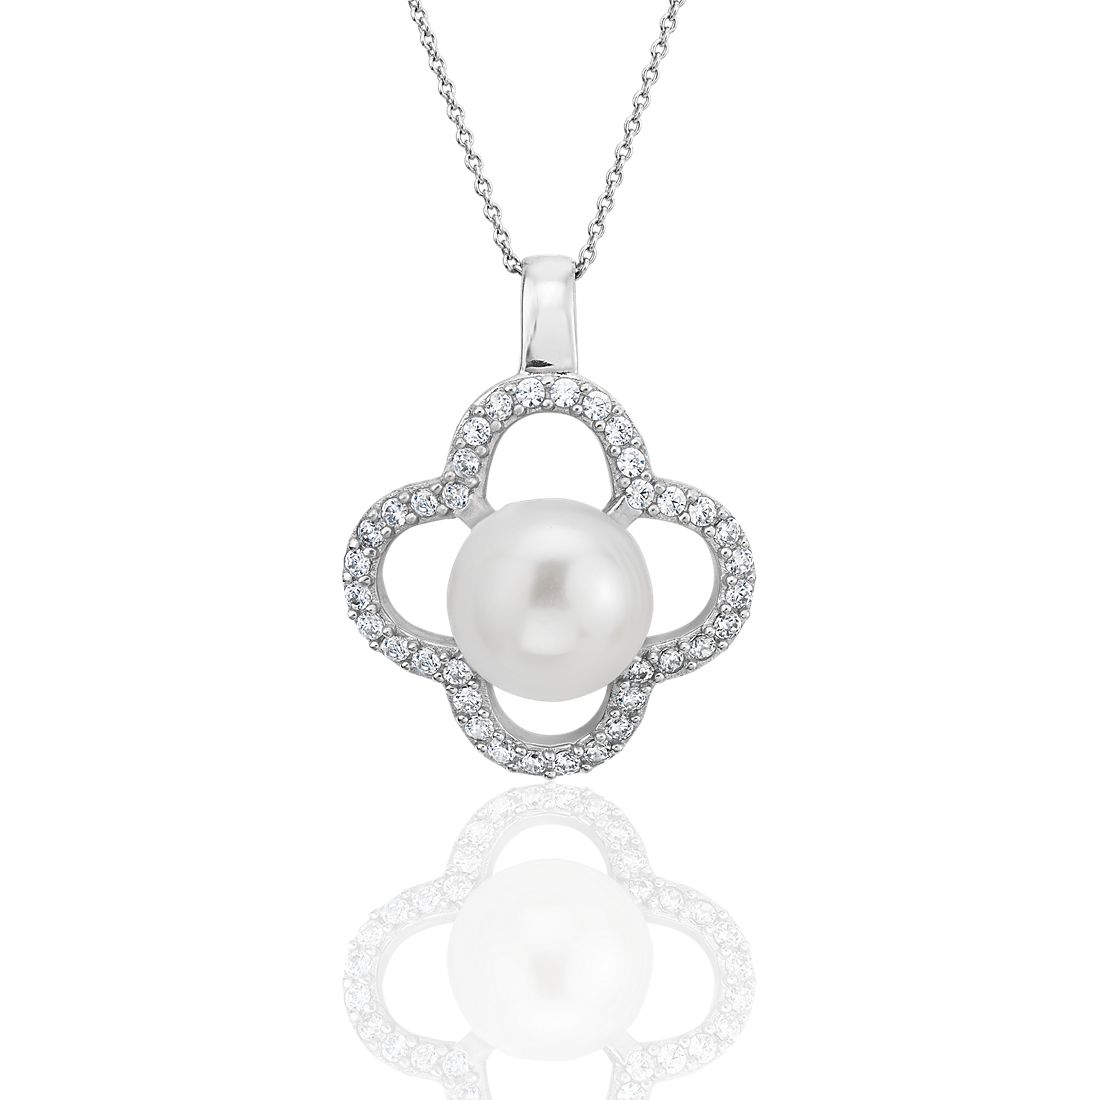 Freshwater Cultured Pearl Pendant with White Topaz Clover Halo in Sterling Silver (10-11mm)